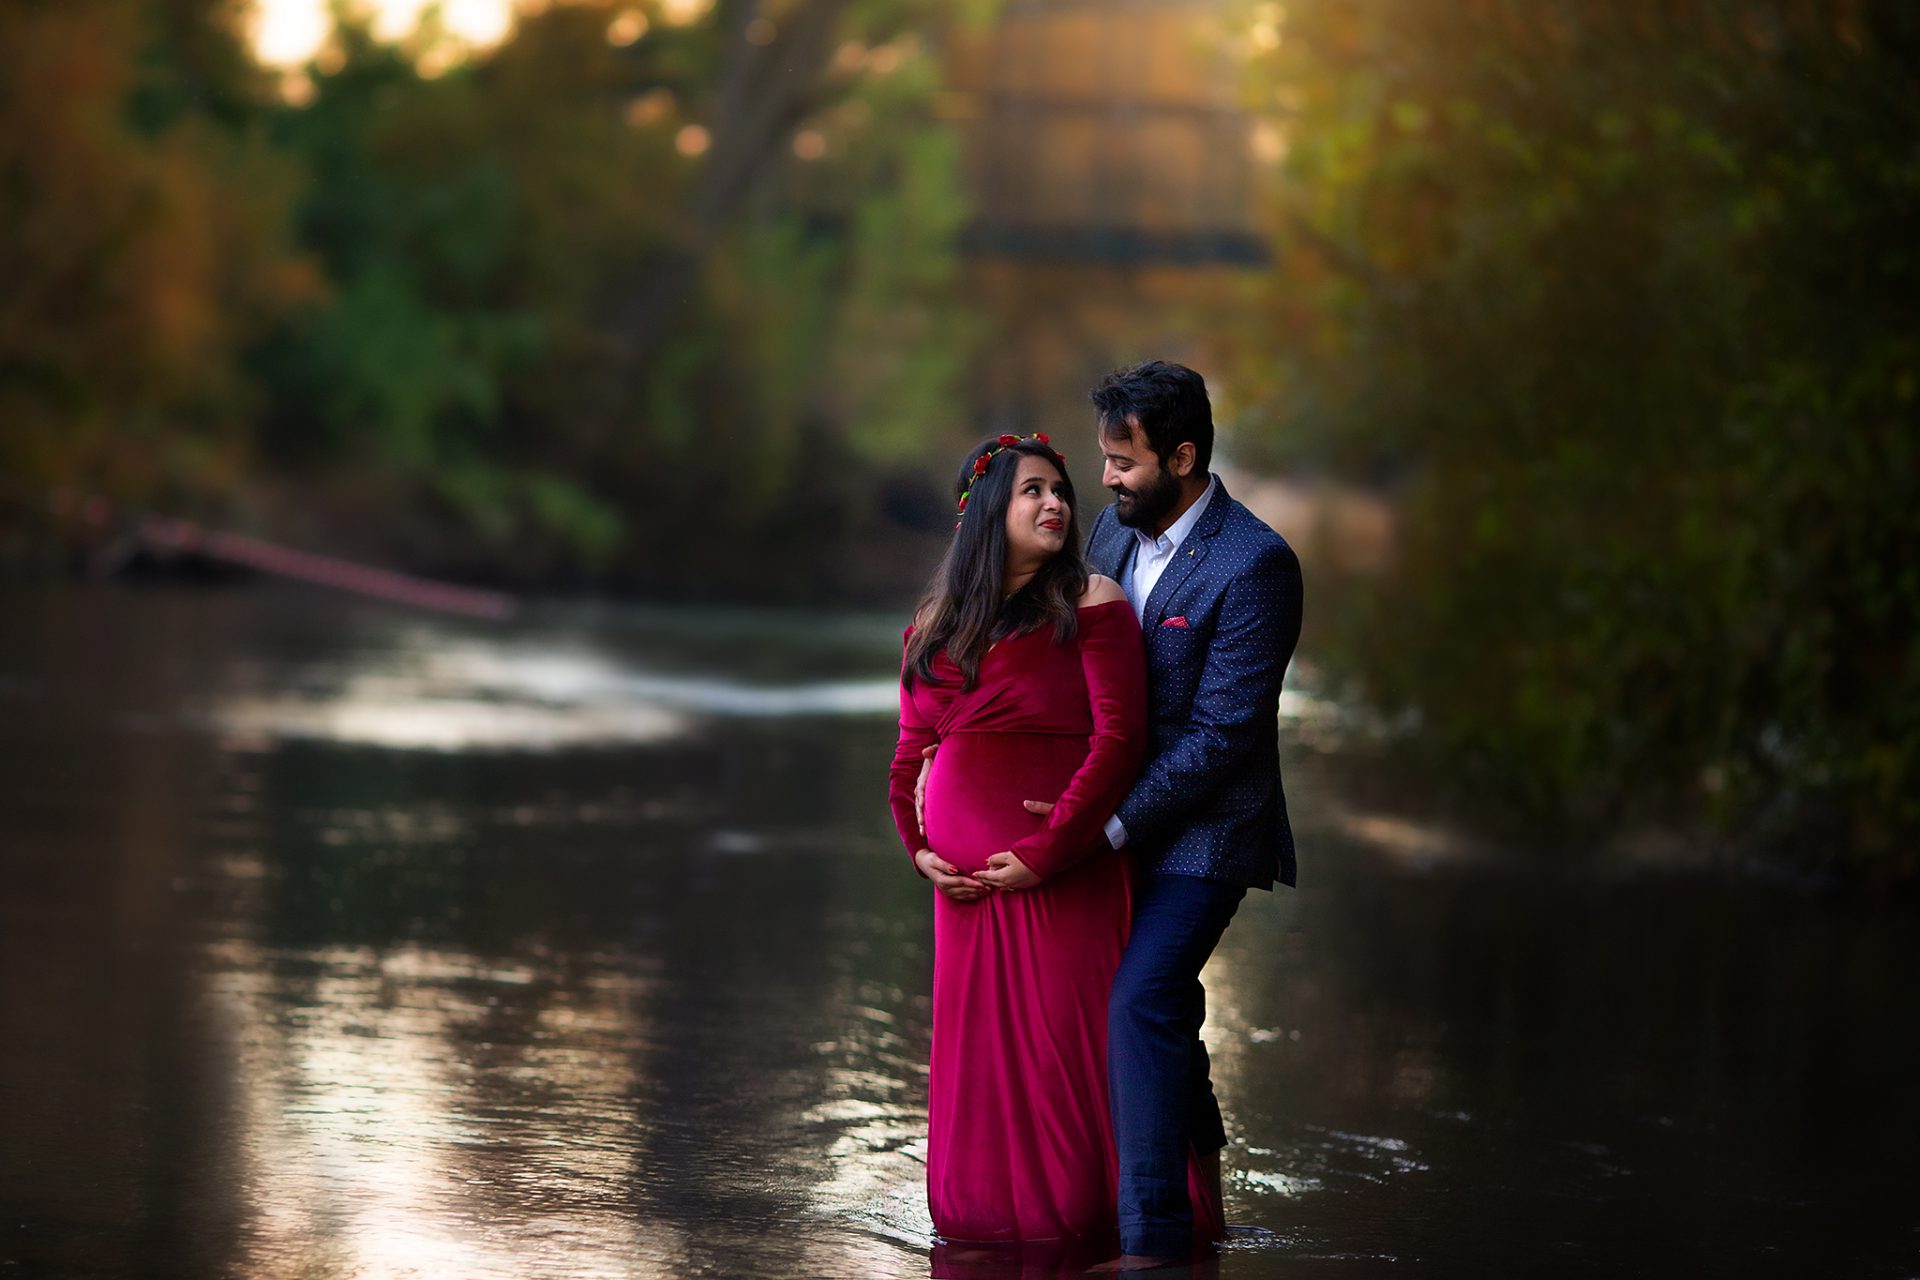 8 Reasons to book a Maternity Photo Sessions with Emily Marie